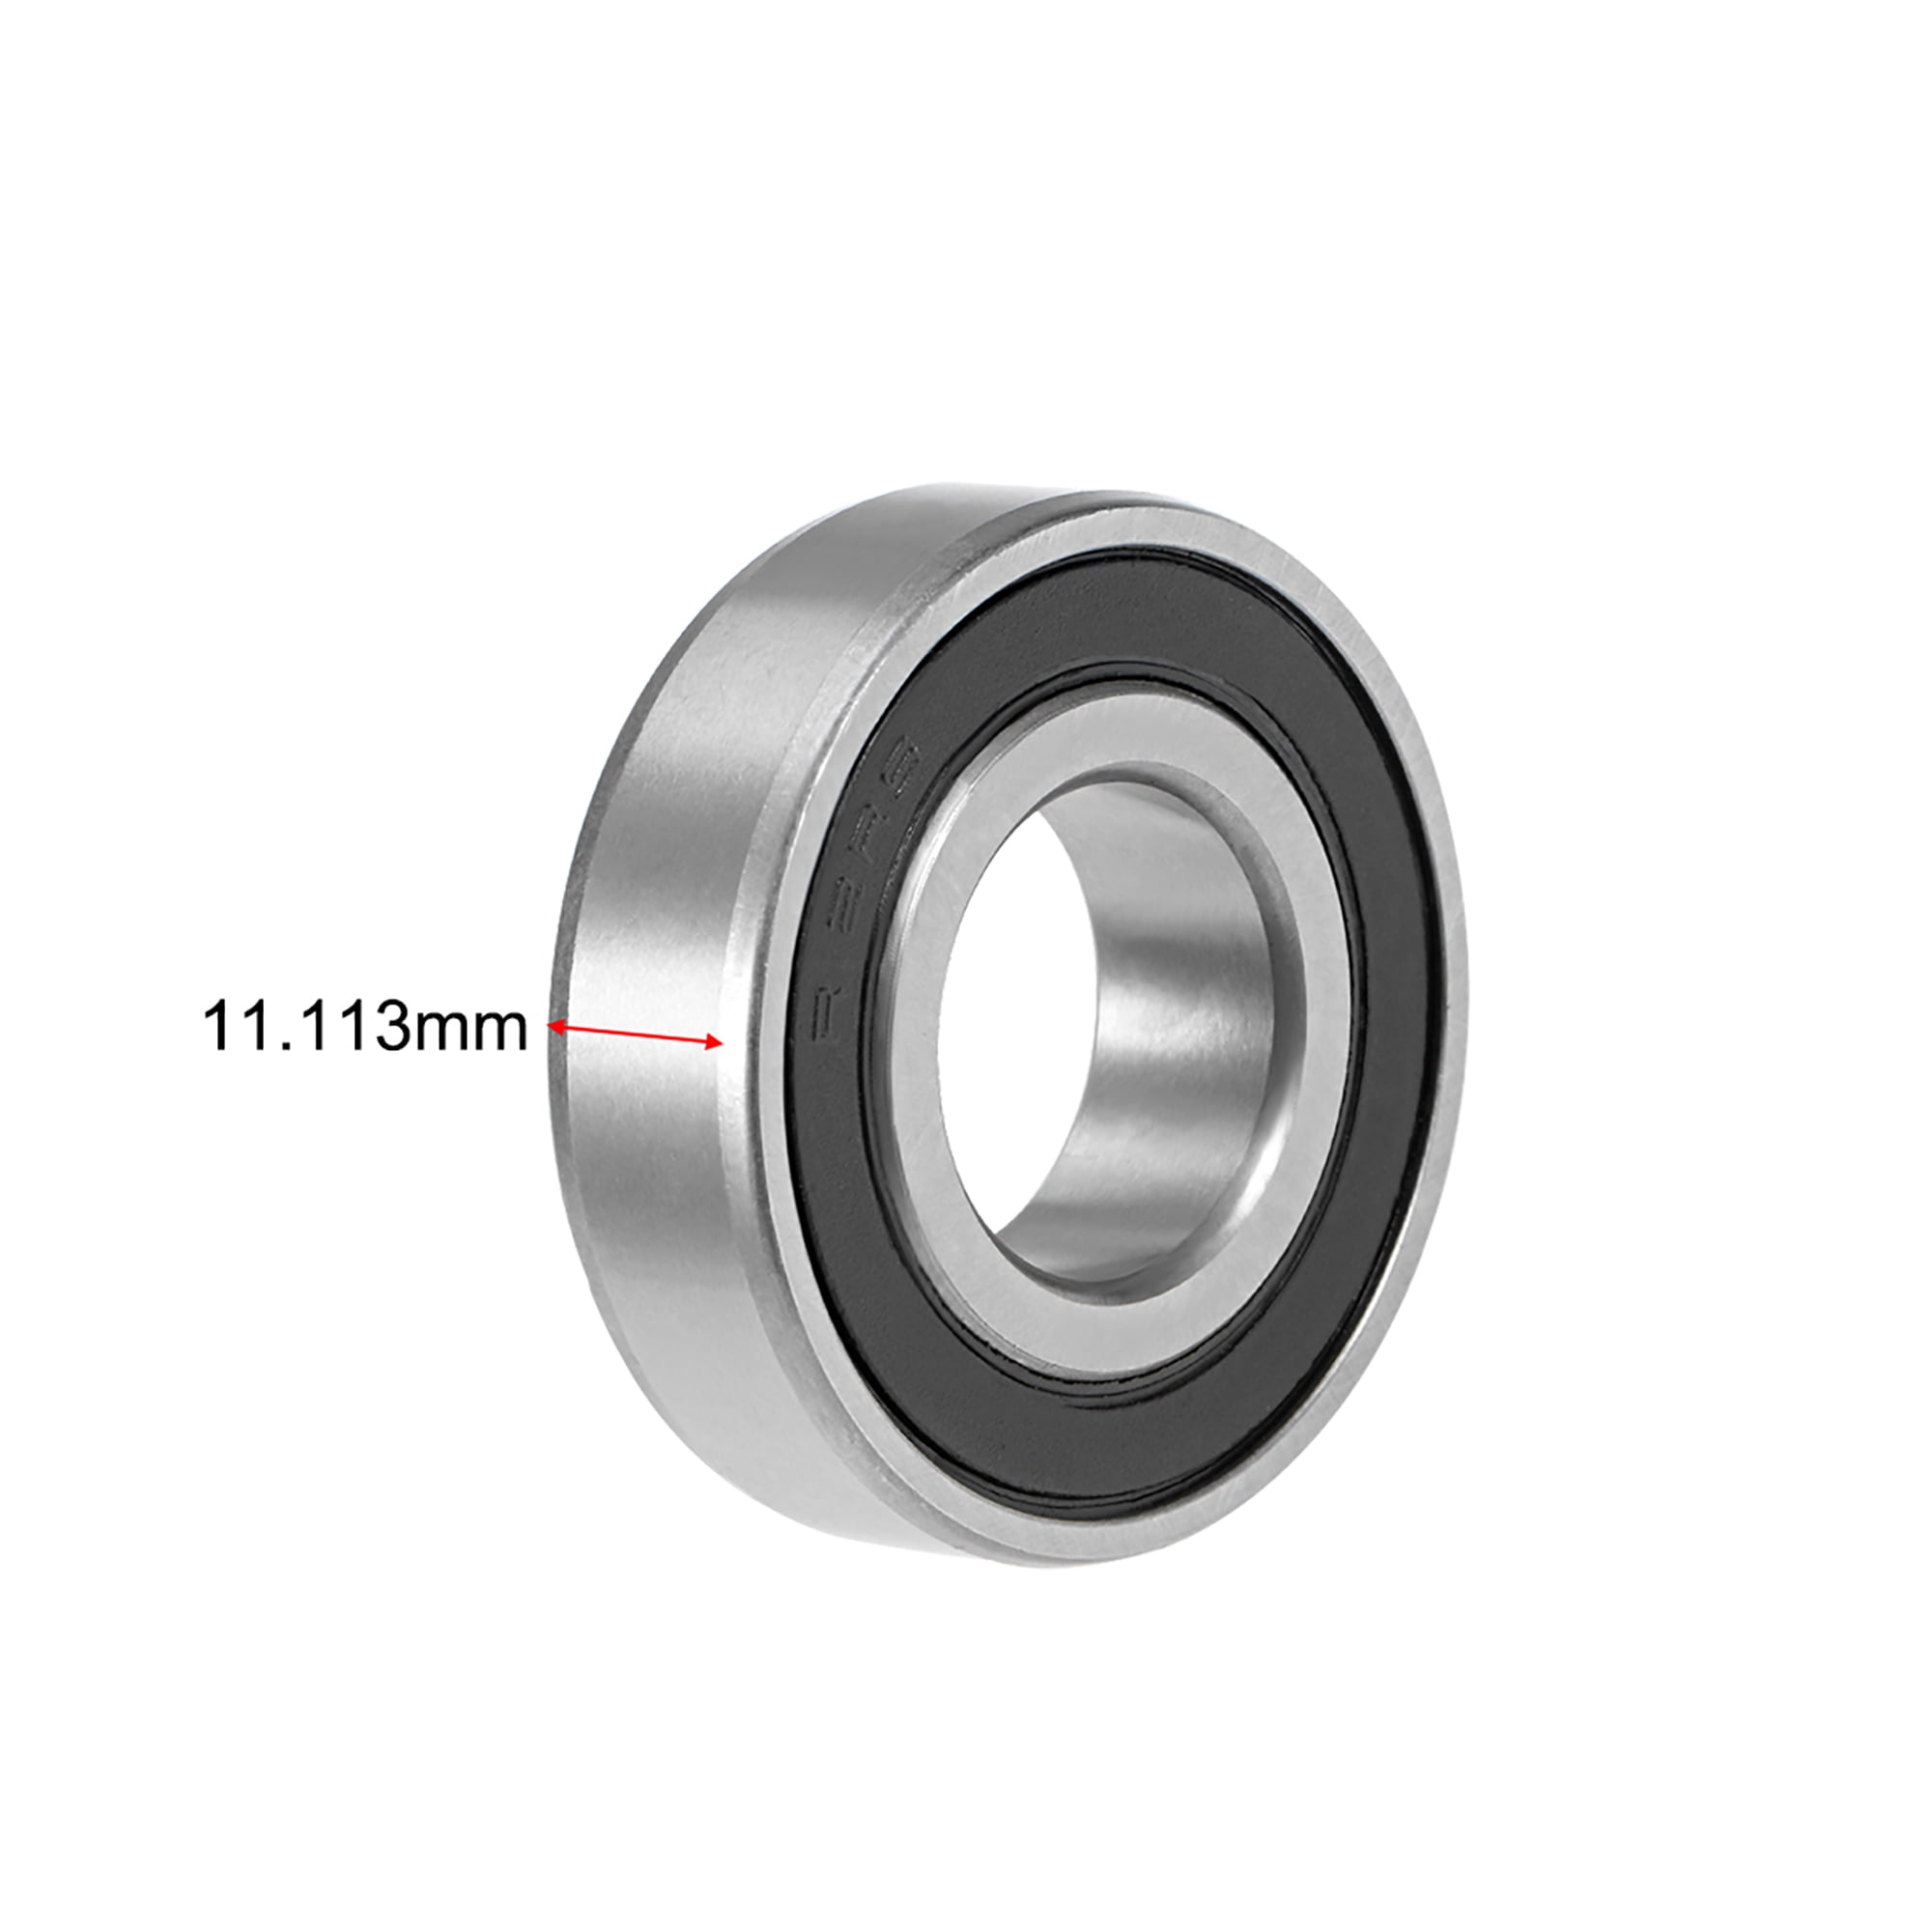 R12 2RS 3/4x1-5/8x7/16" Imperial Ball Bearing